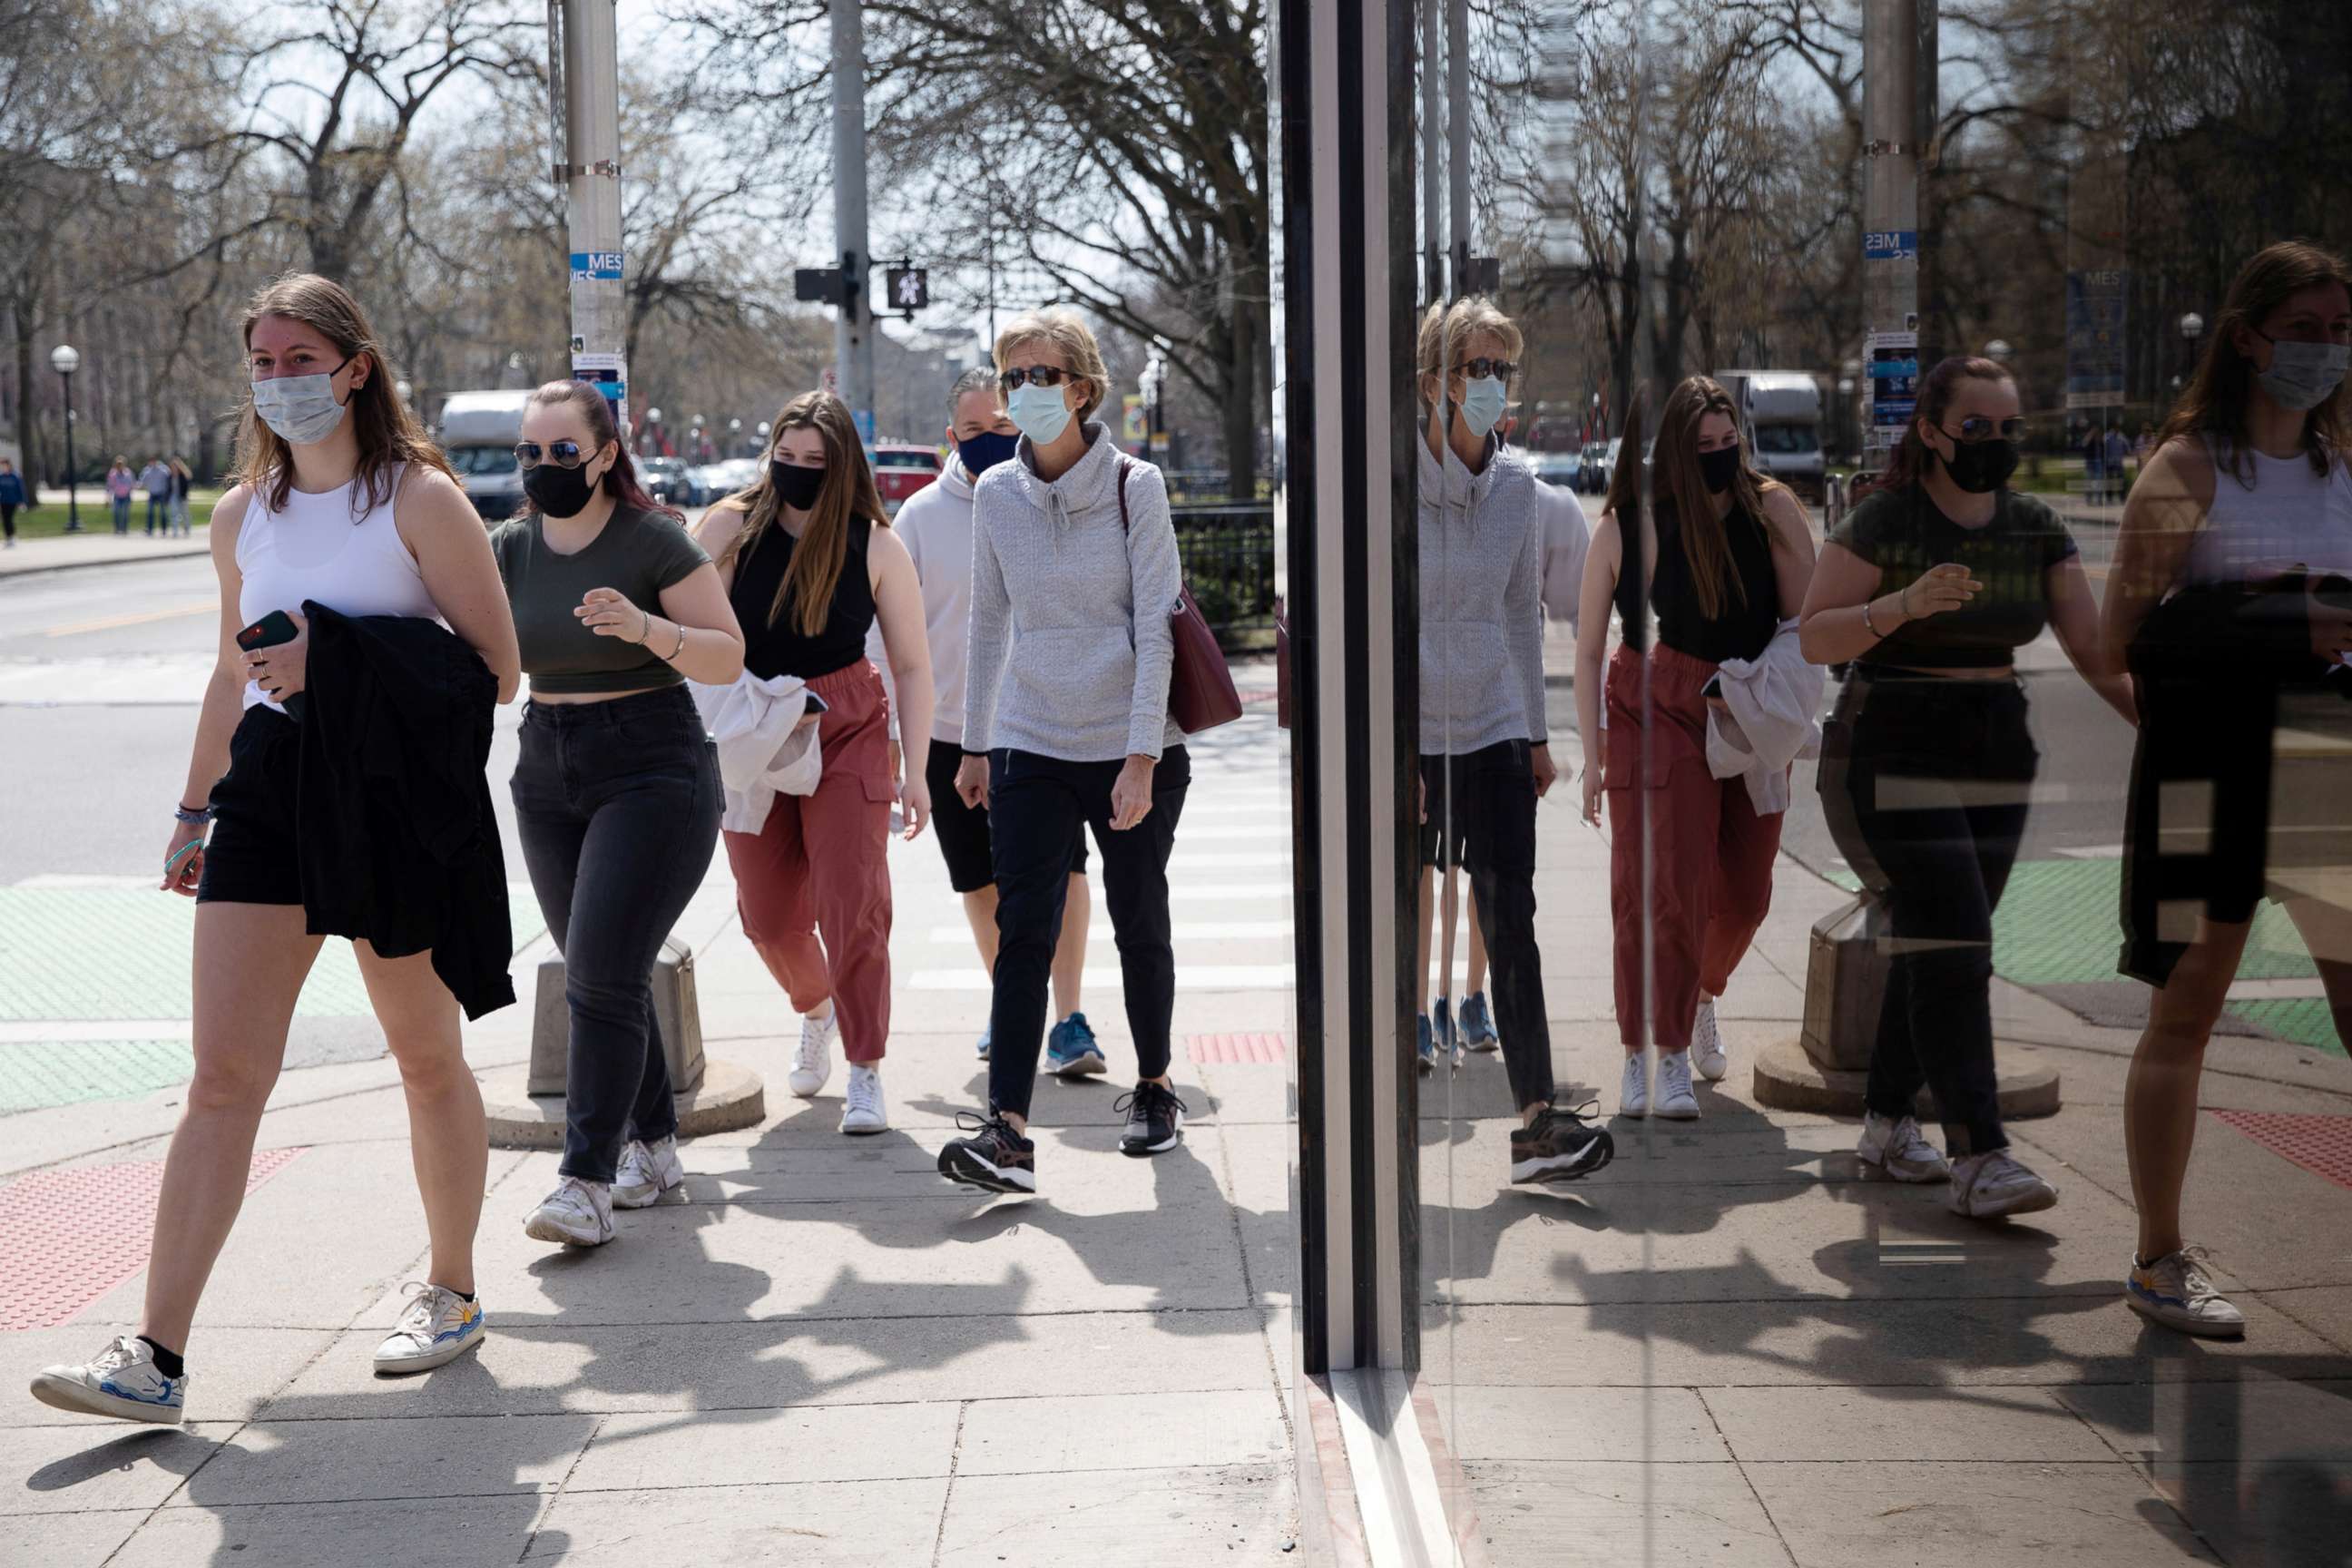 PHOTO: A group of people walk wearing protective masks head to a restaurant as COVID-19 restrictions are eased in Ann Arbor, Mich., on April 4, 2021.